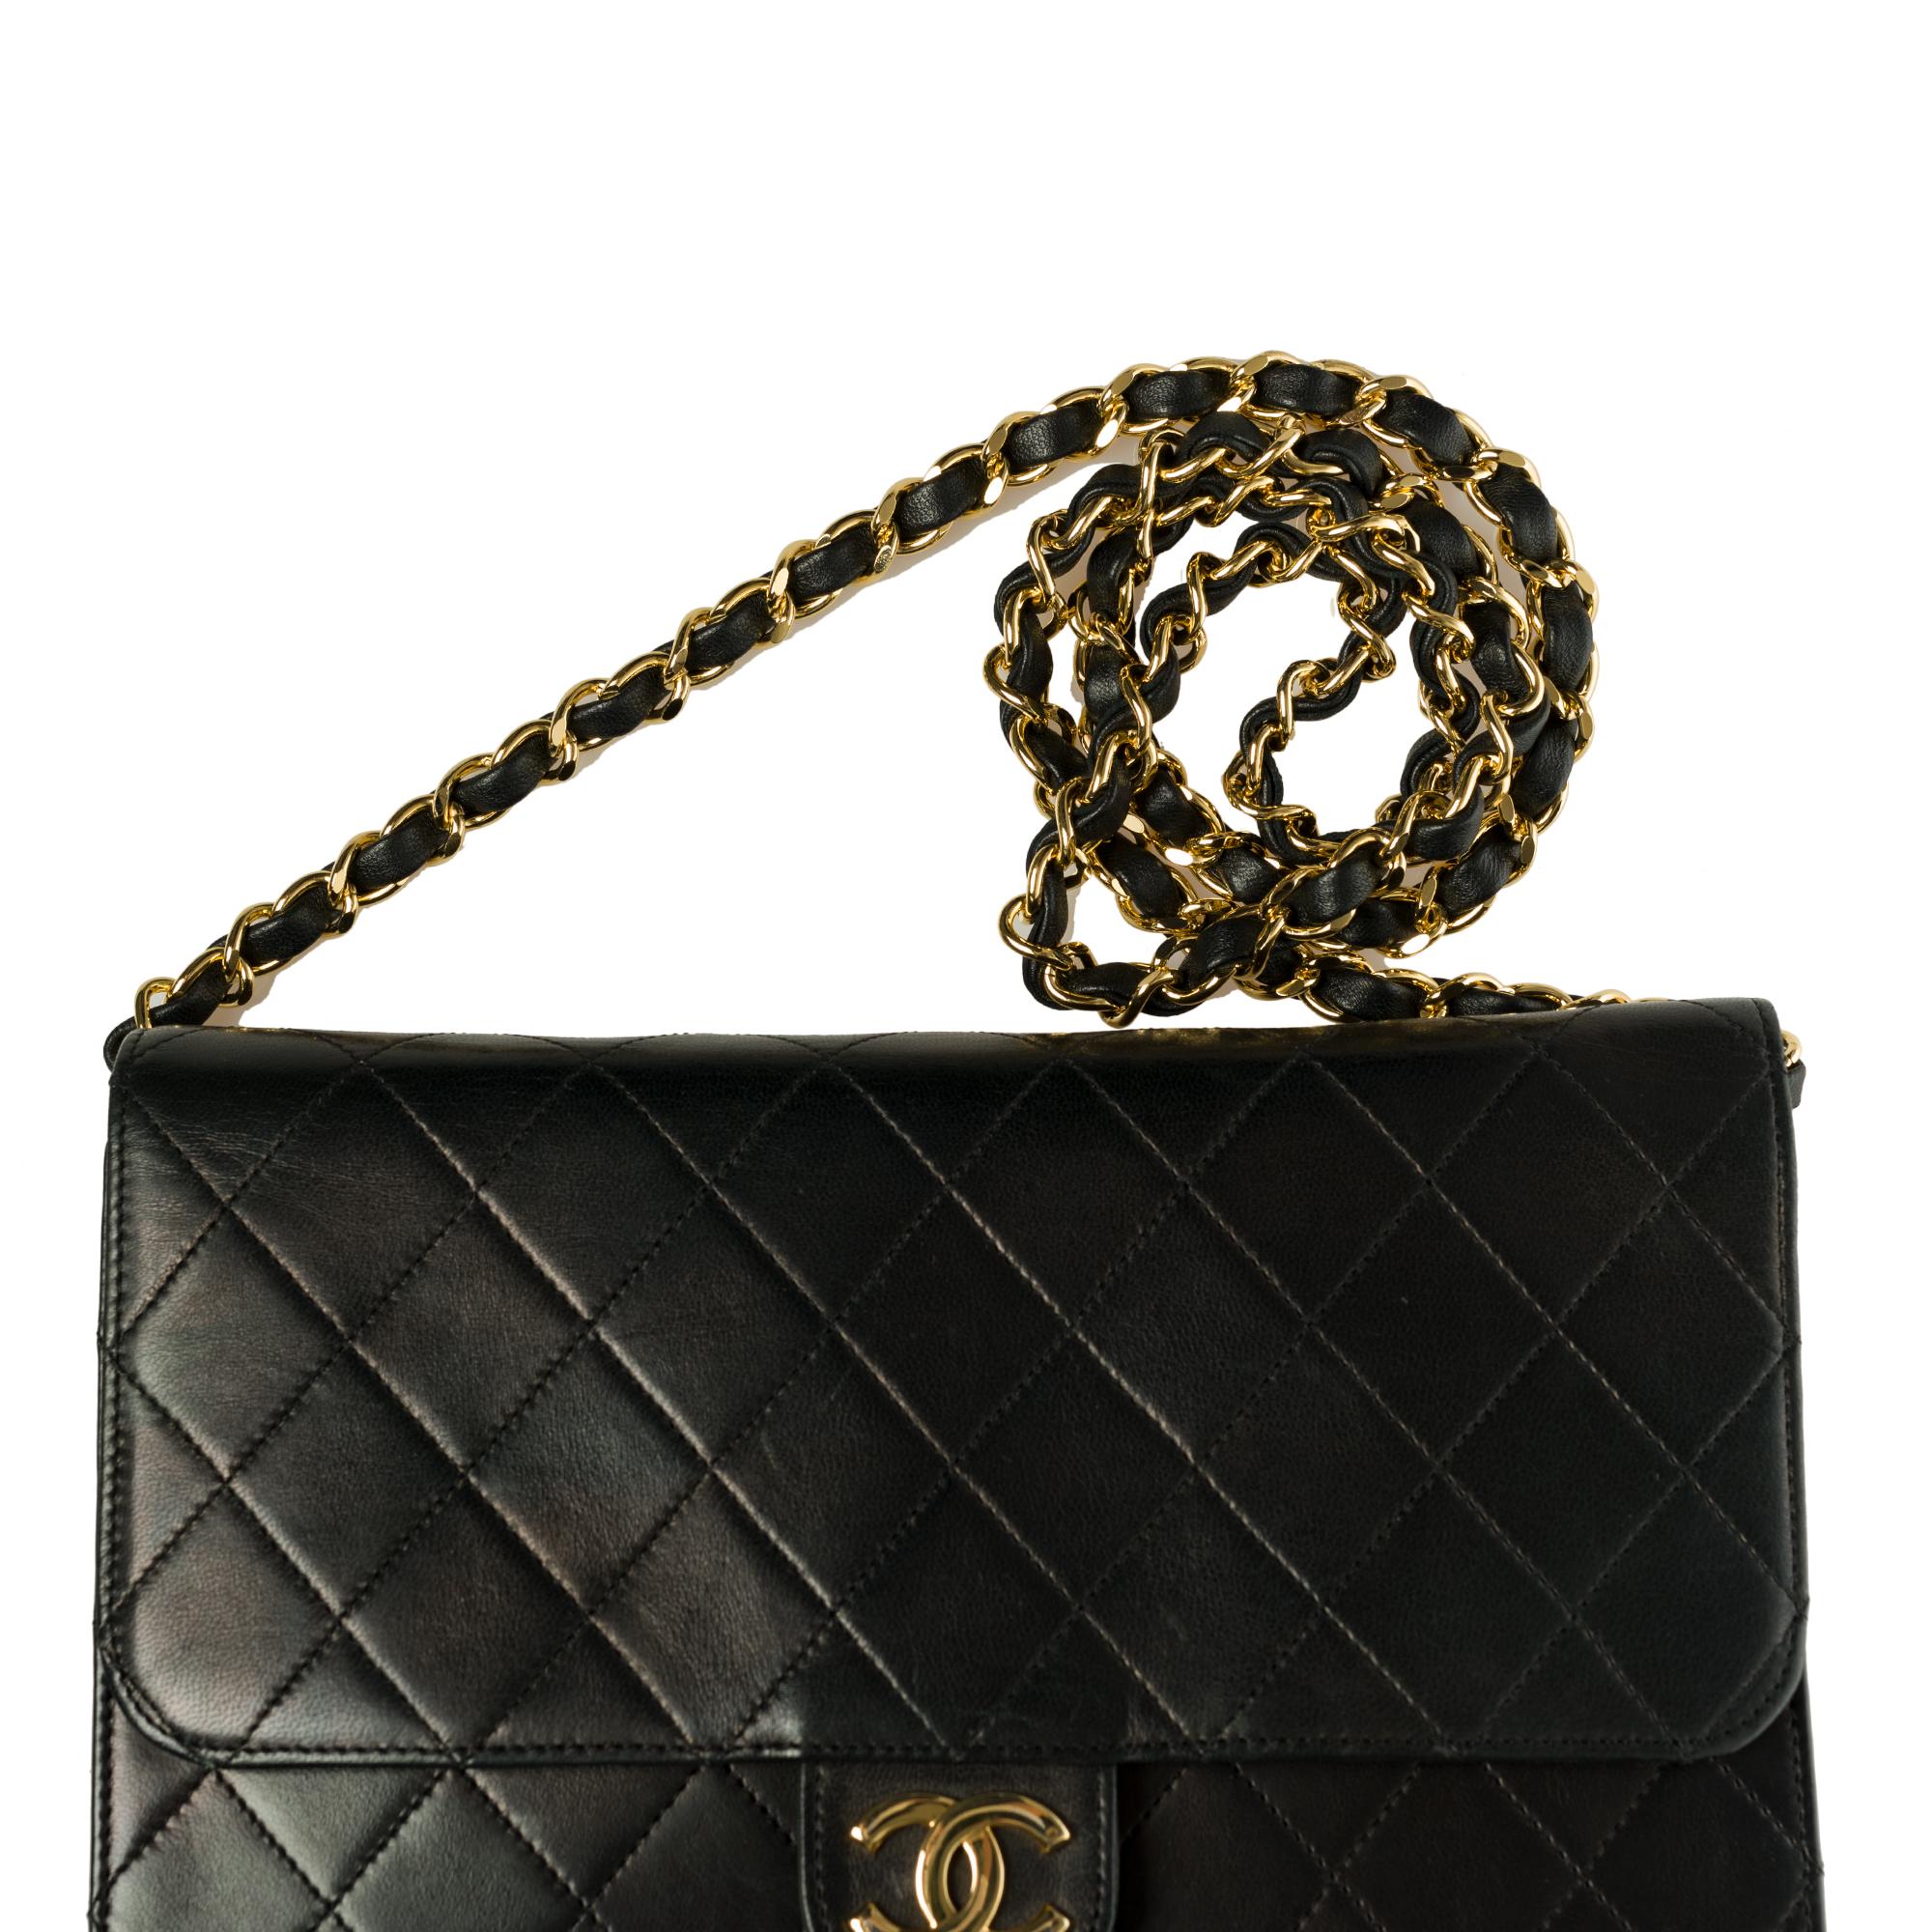 Stunning Chanel Classic shoulder bag in black quilted lambskin and gold hardware 2